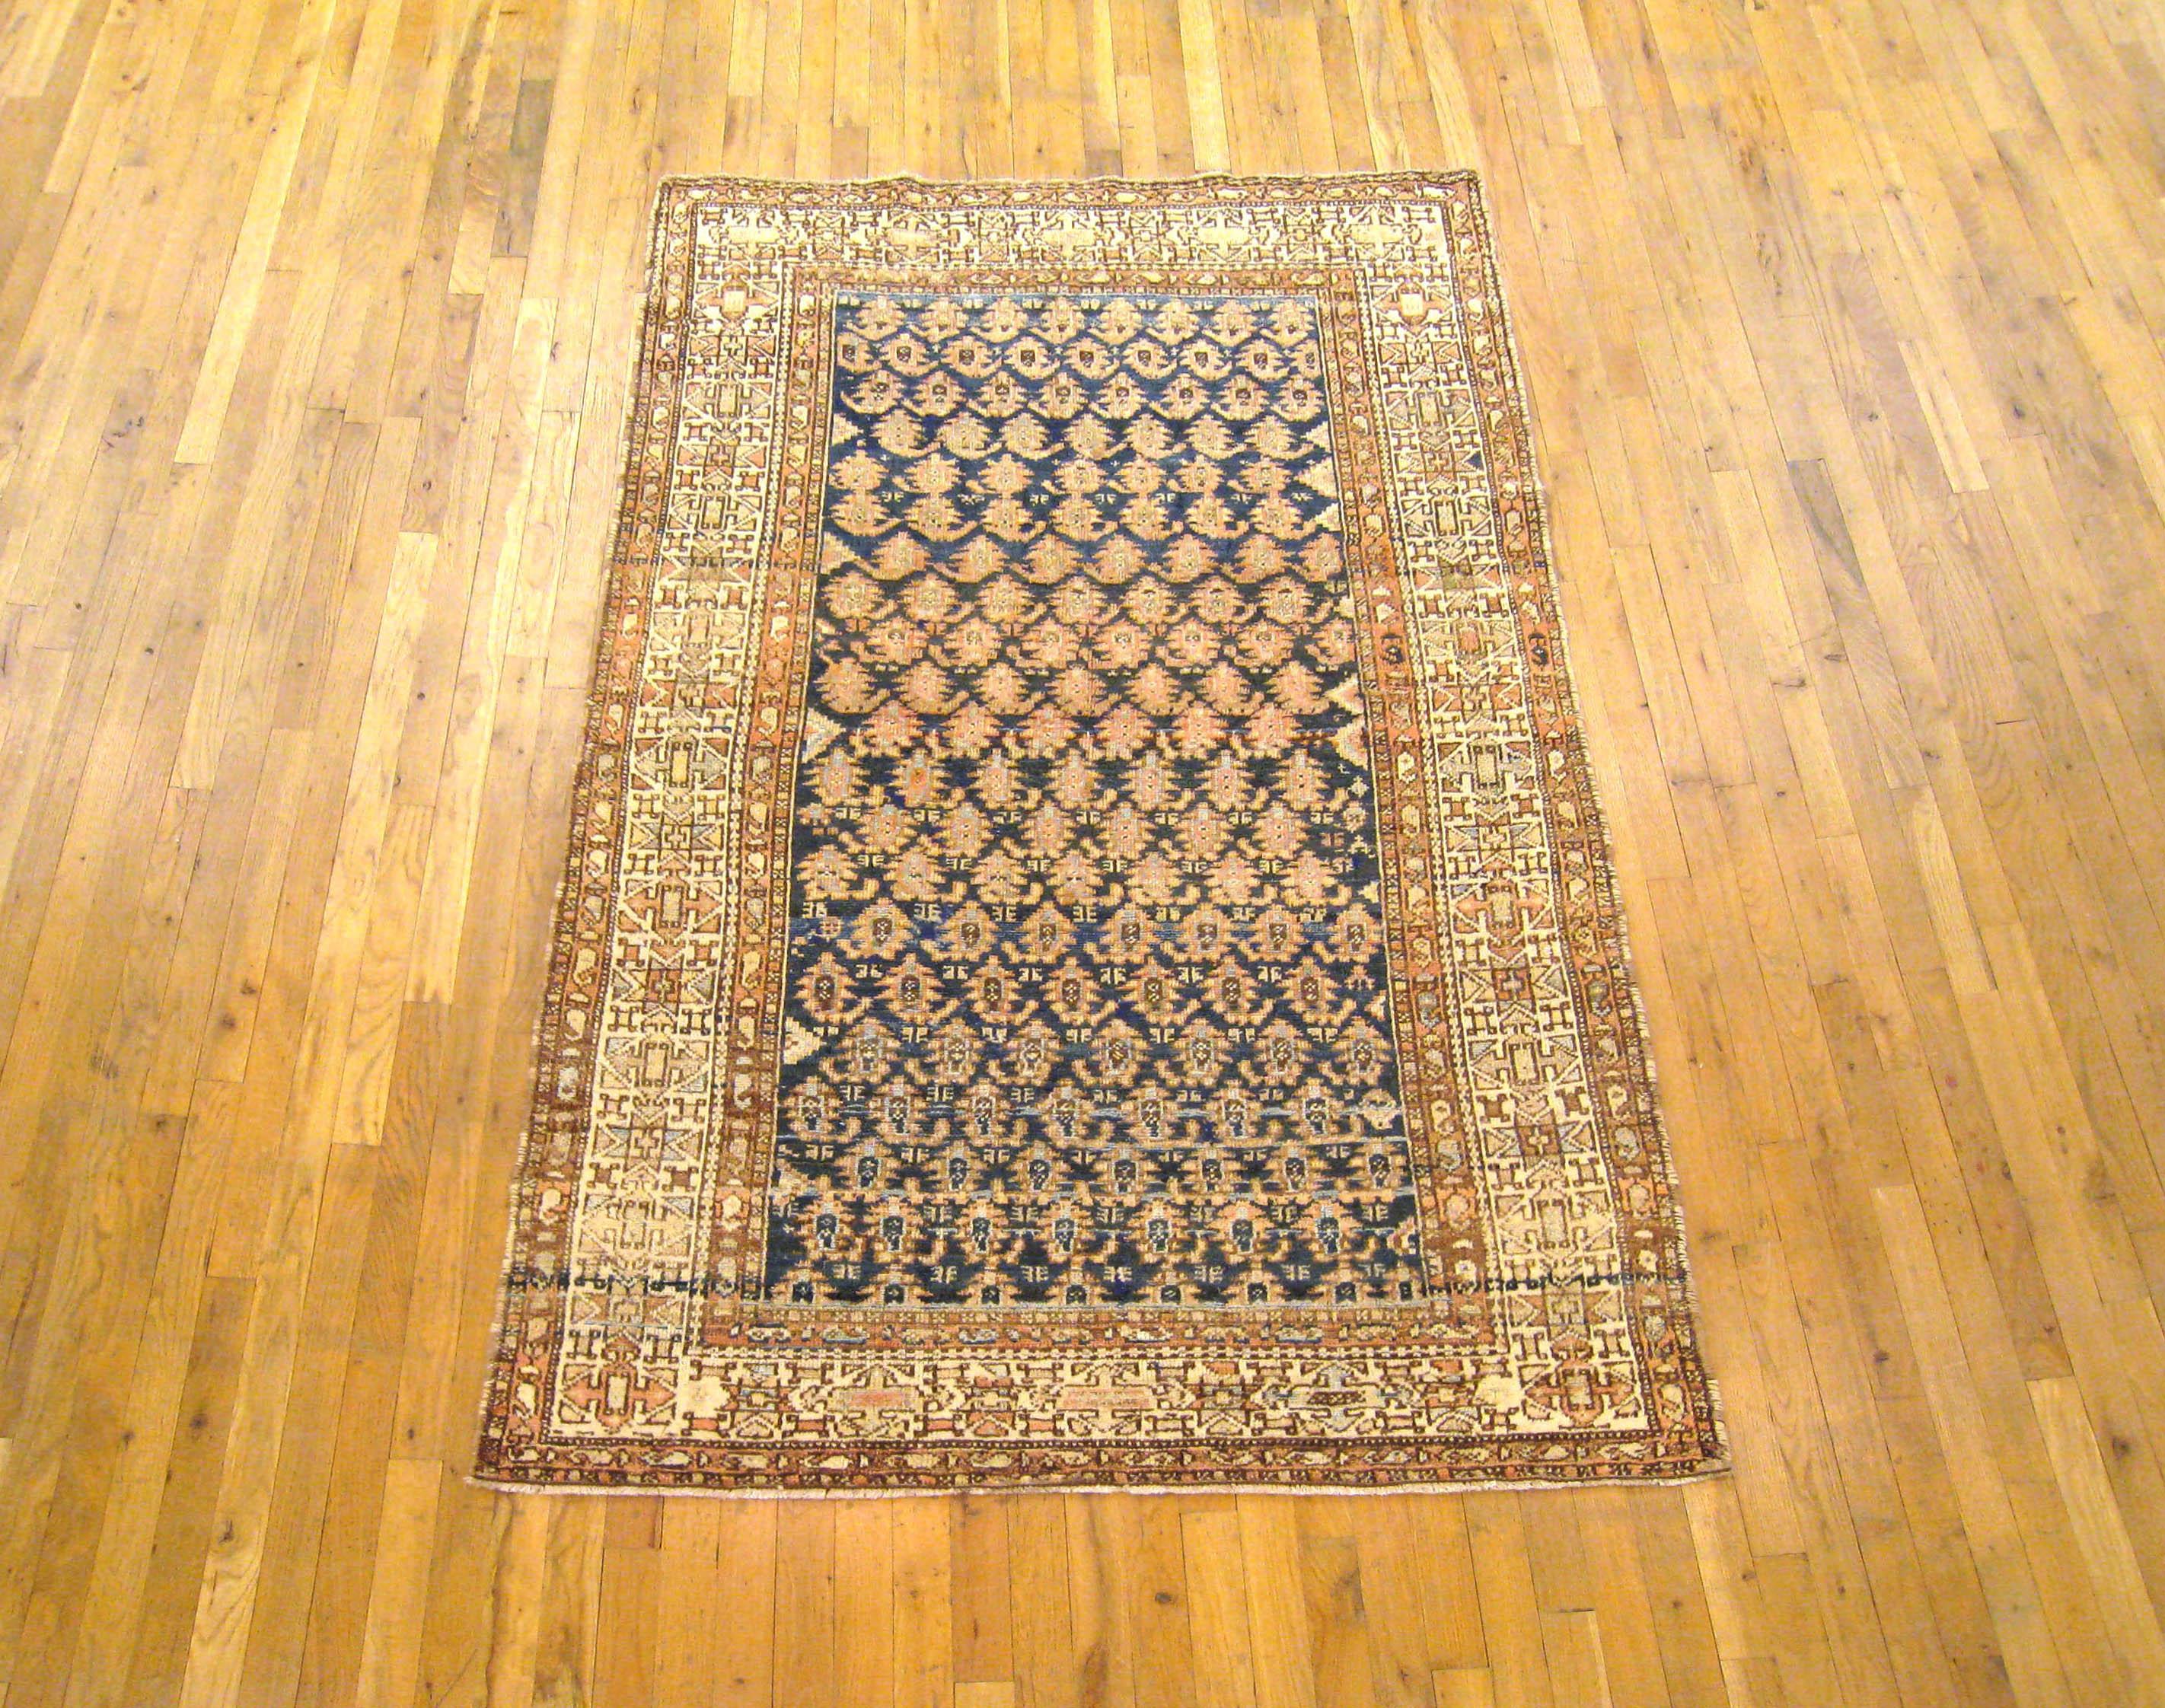 An antique Persian Malayer rug, size 6'8 x 4'3, circa 1910. This lovely rug has a unique paisley design in its blue primary field, with a number of variations on the paisley motif appearing successively from one end to the other. The field is